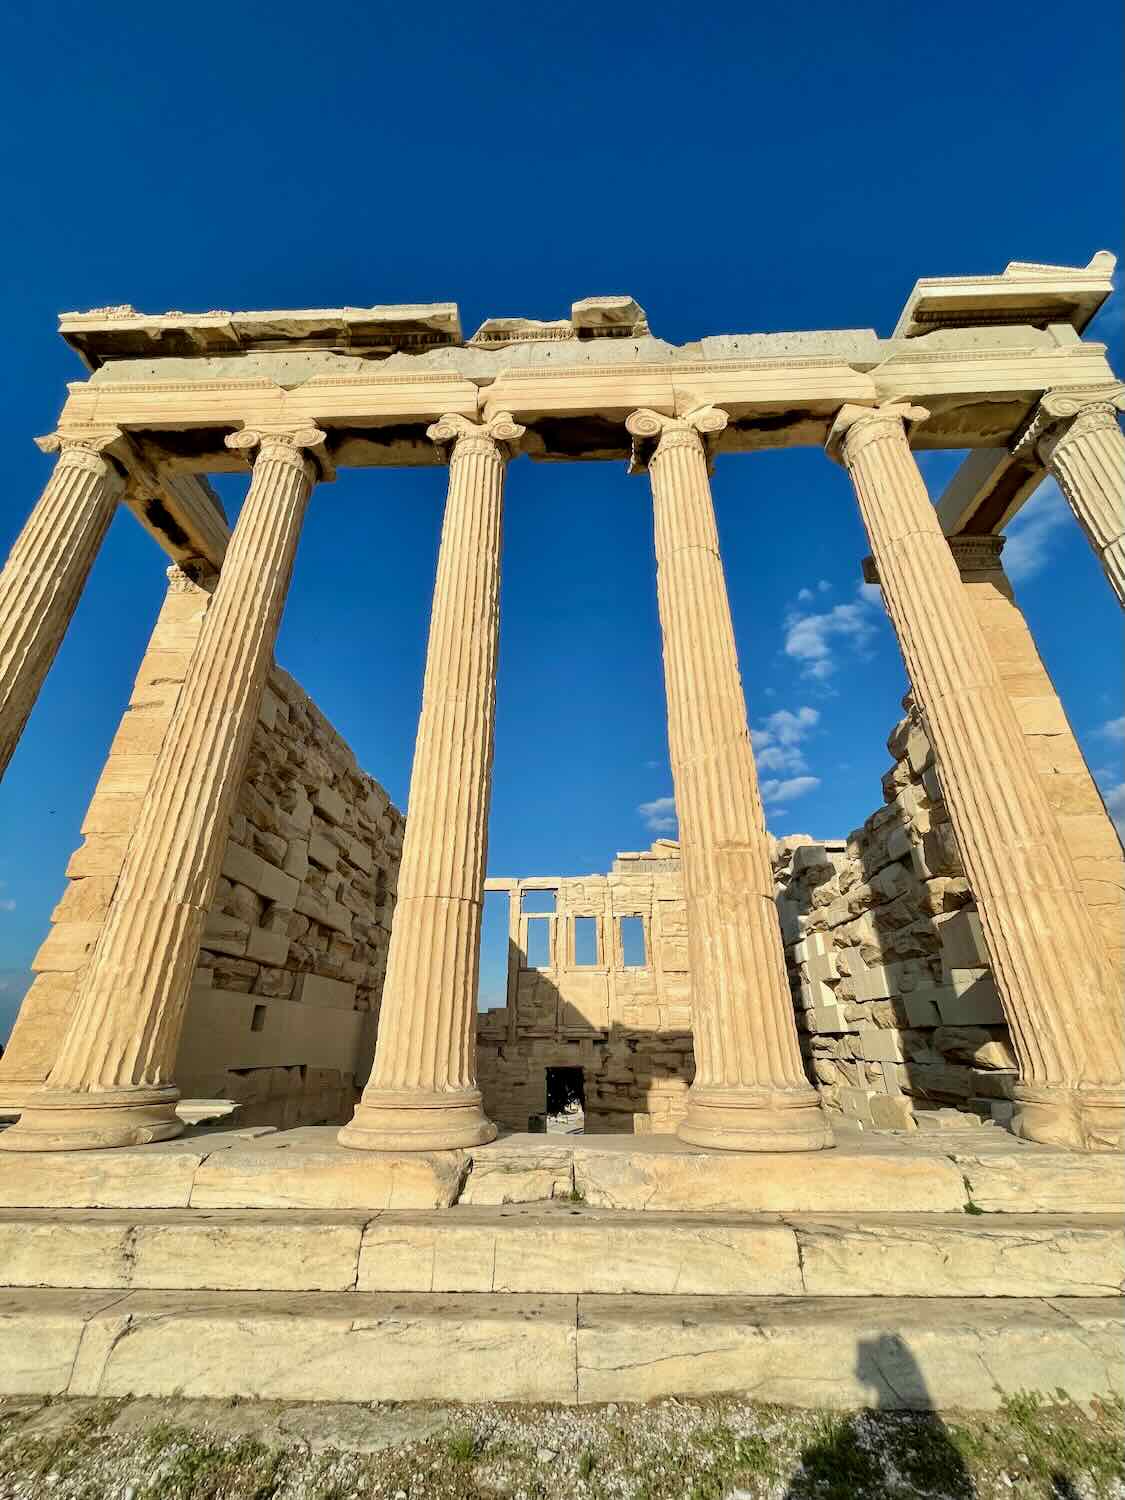 A photo of the Erechtheion, an ancient Greek temple with tall columns, situated on the Acropolis of Athens under a clear blue sky.